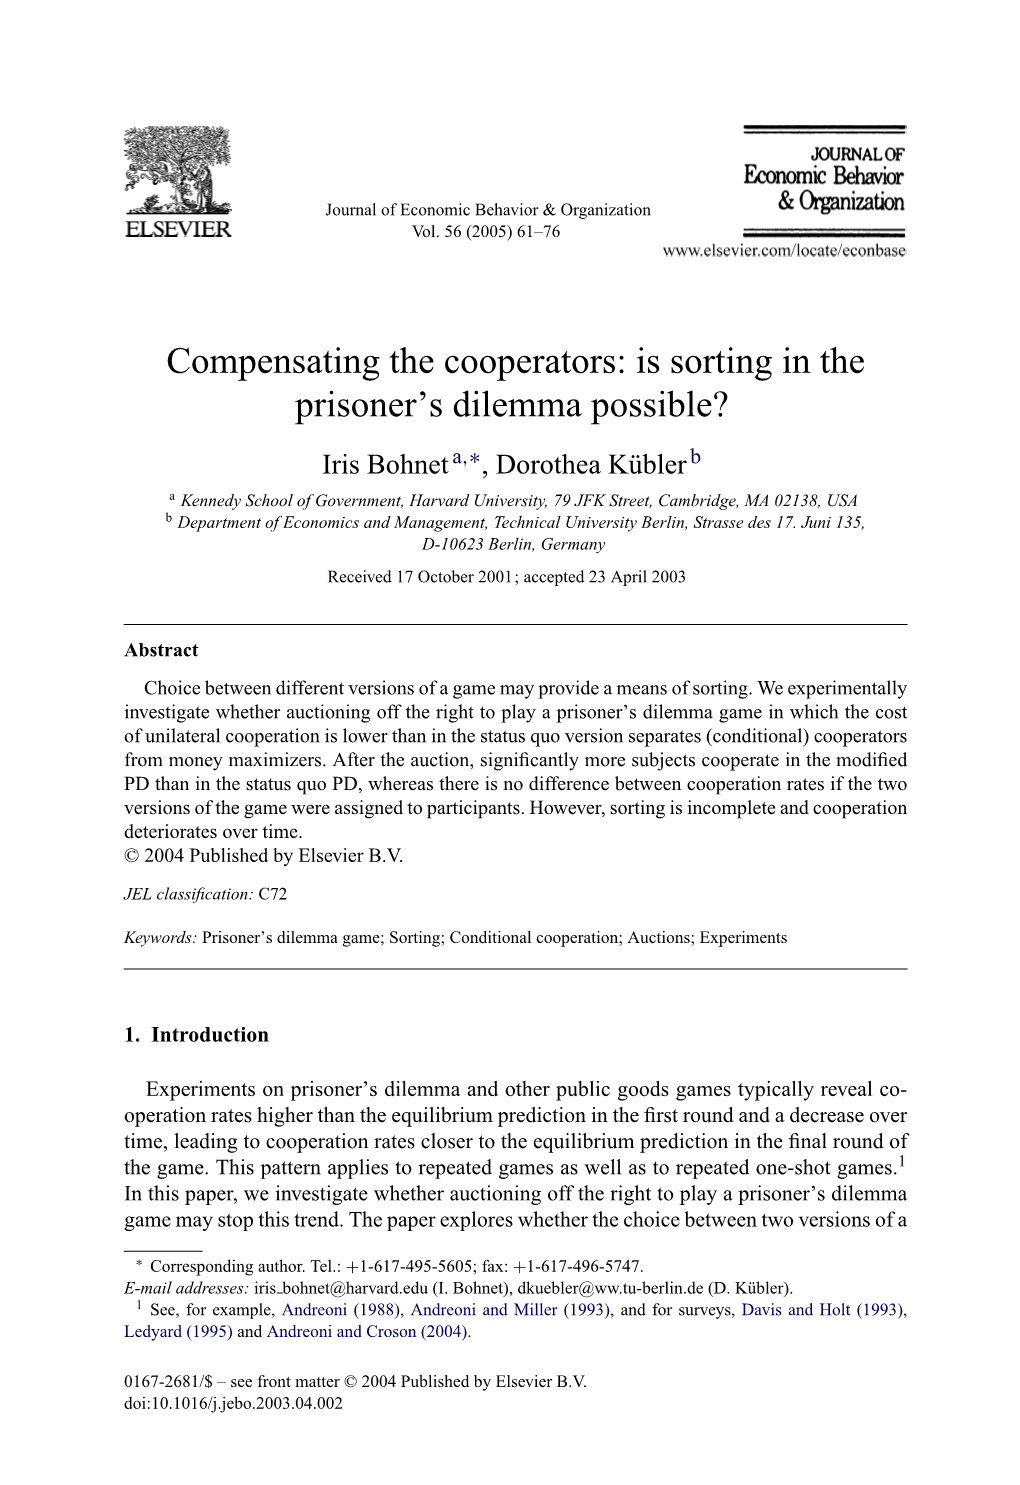 Compensating the Cooperators: Is Sorting in the Prisoner's Dilemma